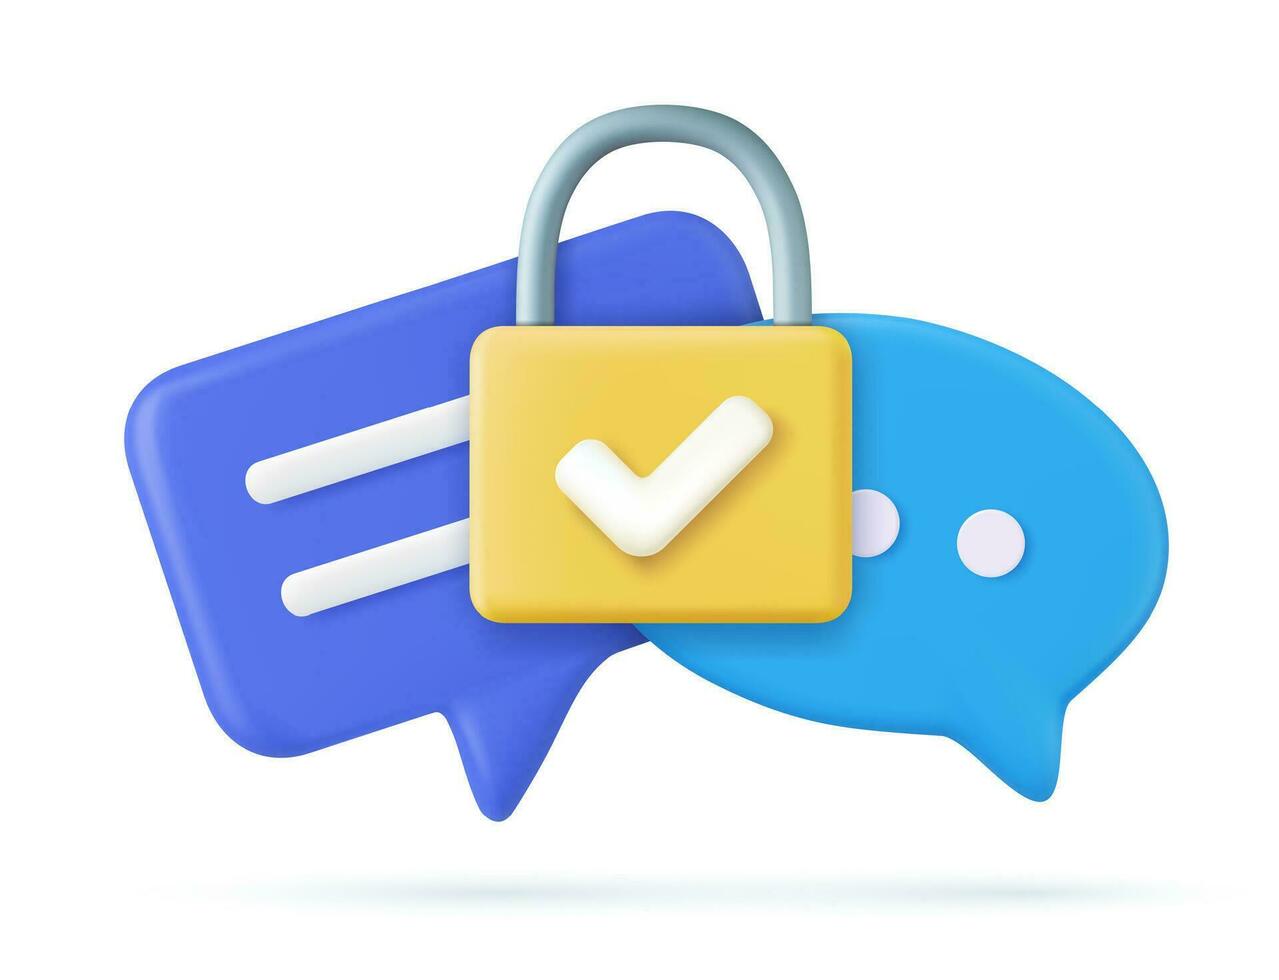 3d Chat bubble rendering. 3d Chatting, message box. private chat data protection secured with locked padlock and check mark icon. Social network communication concept. Vector illustration